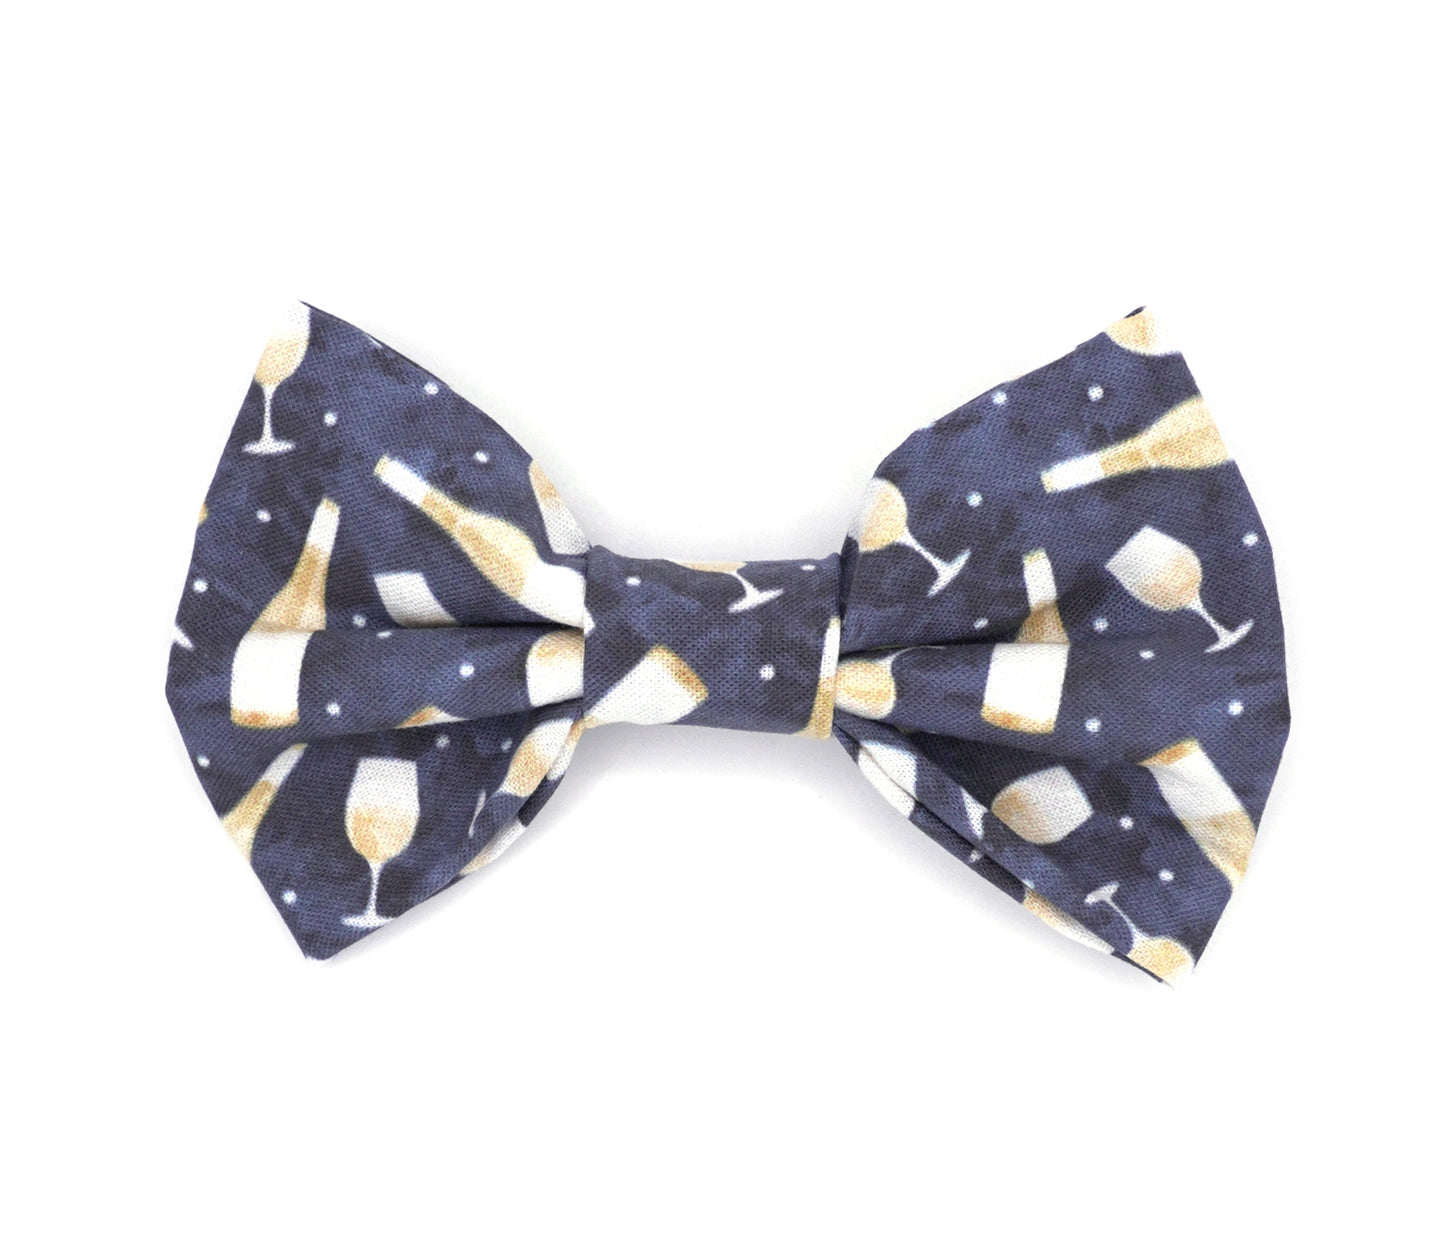 Handmade cotton bow tie for dogs (or other pets). Elastic straps on back with snaps make it easy to add to collar, harness, or leash. Navy blue background with white wine bottles and glasses.